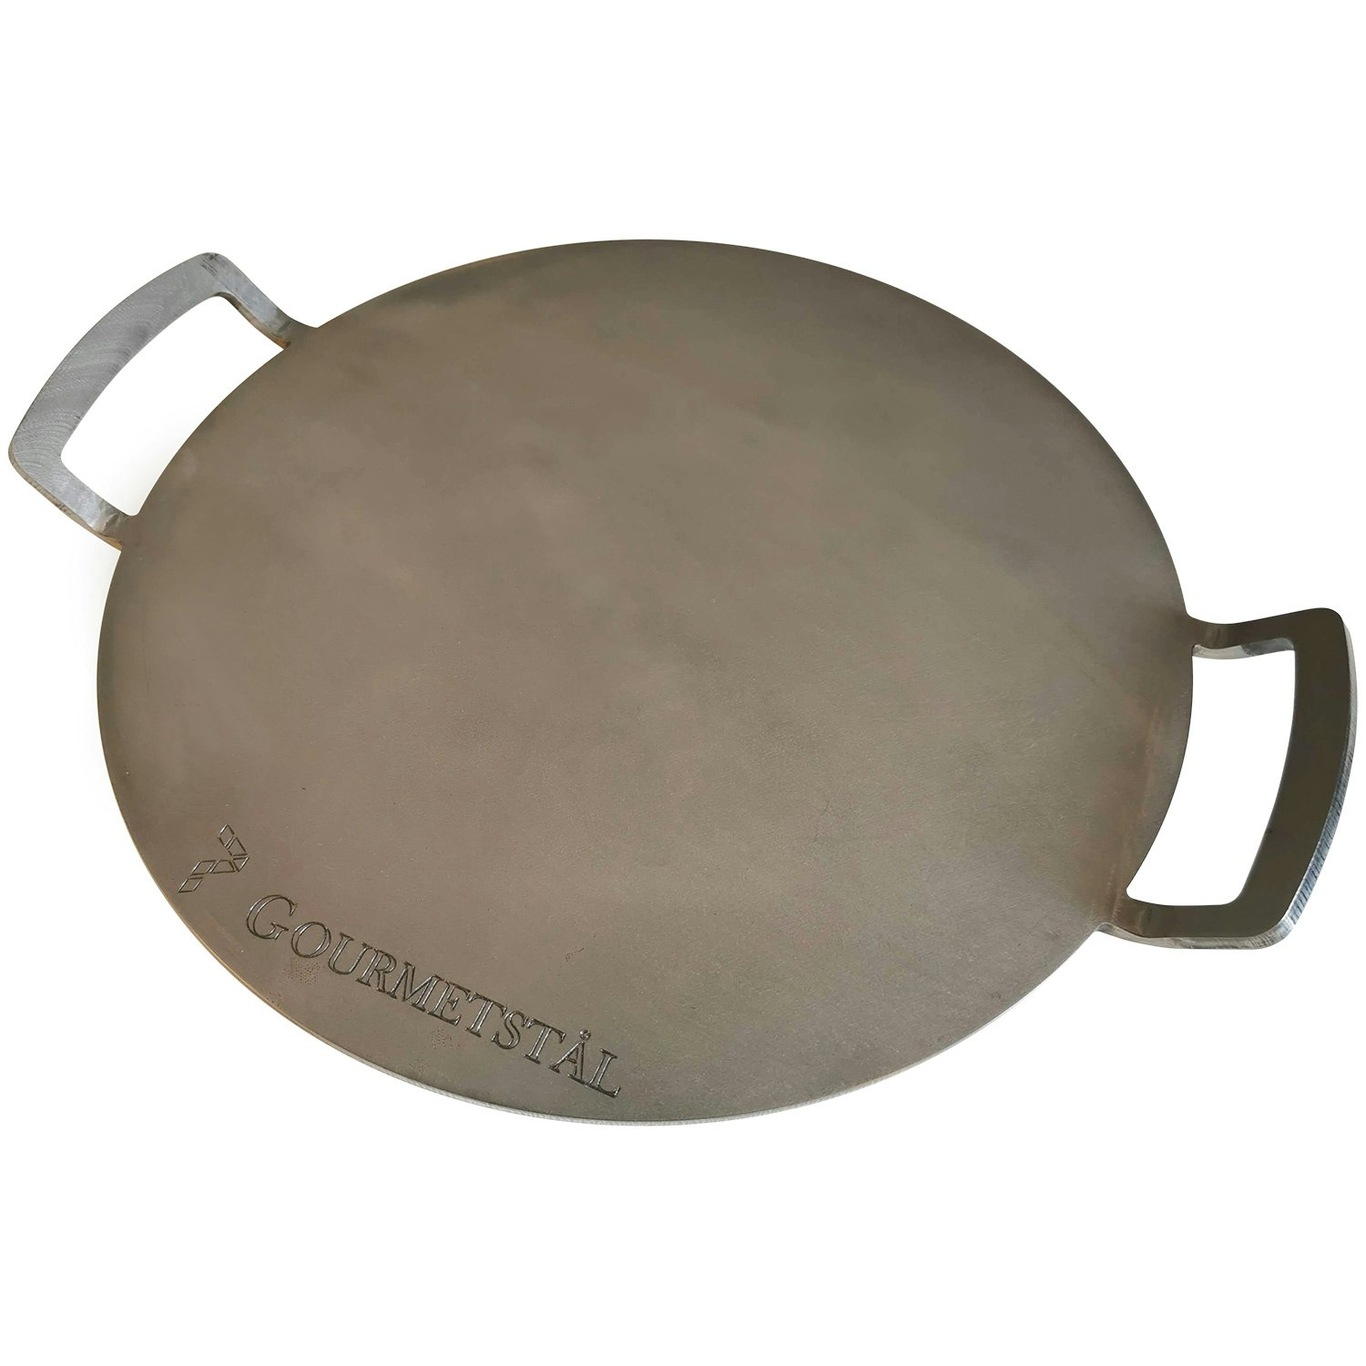 https://royaldesign.com/image/2/gourmetstal-steel-griddle-round-with-handle-5?w=800&quality=80